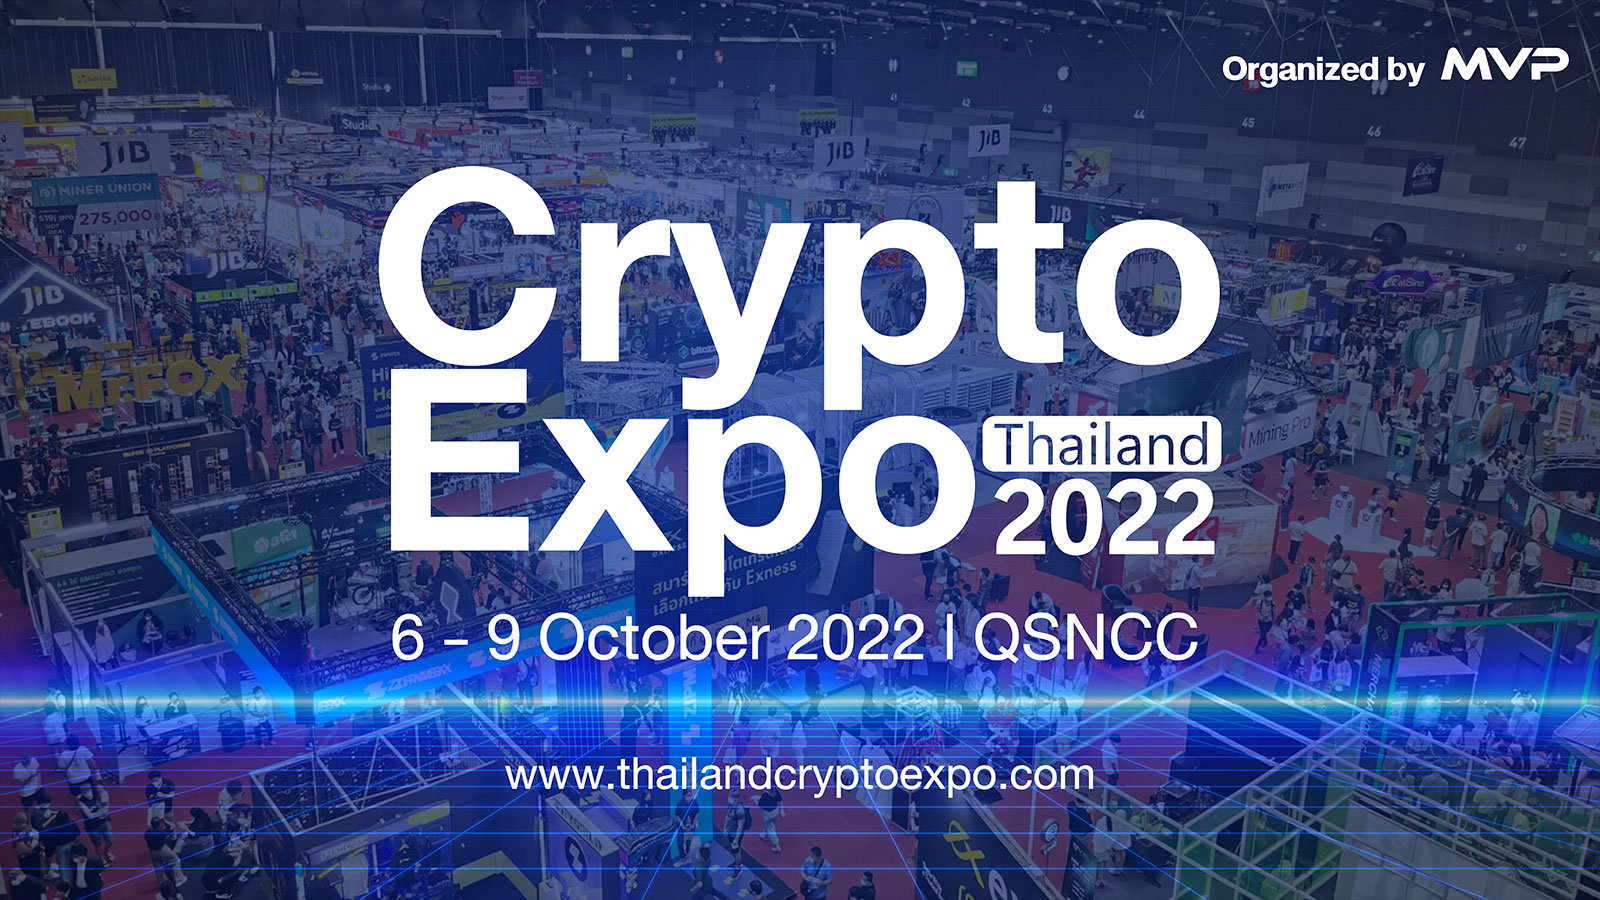 Largest Crypto Expo in South East Asia at Thailand Crypto Expo